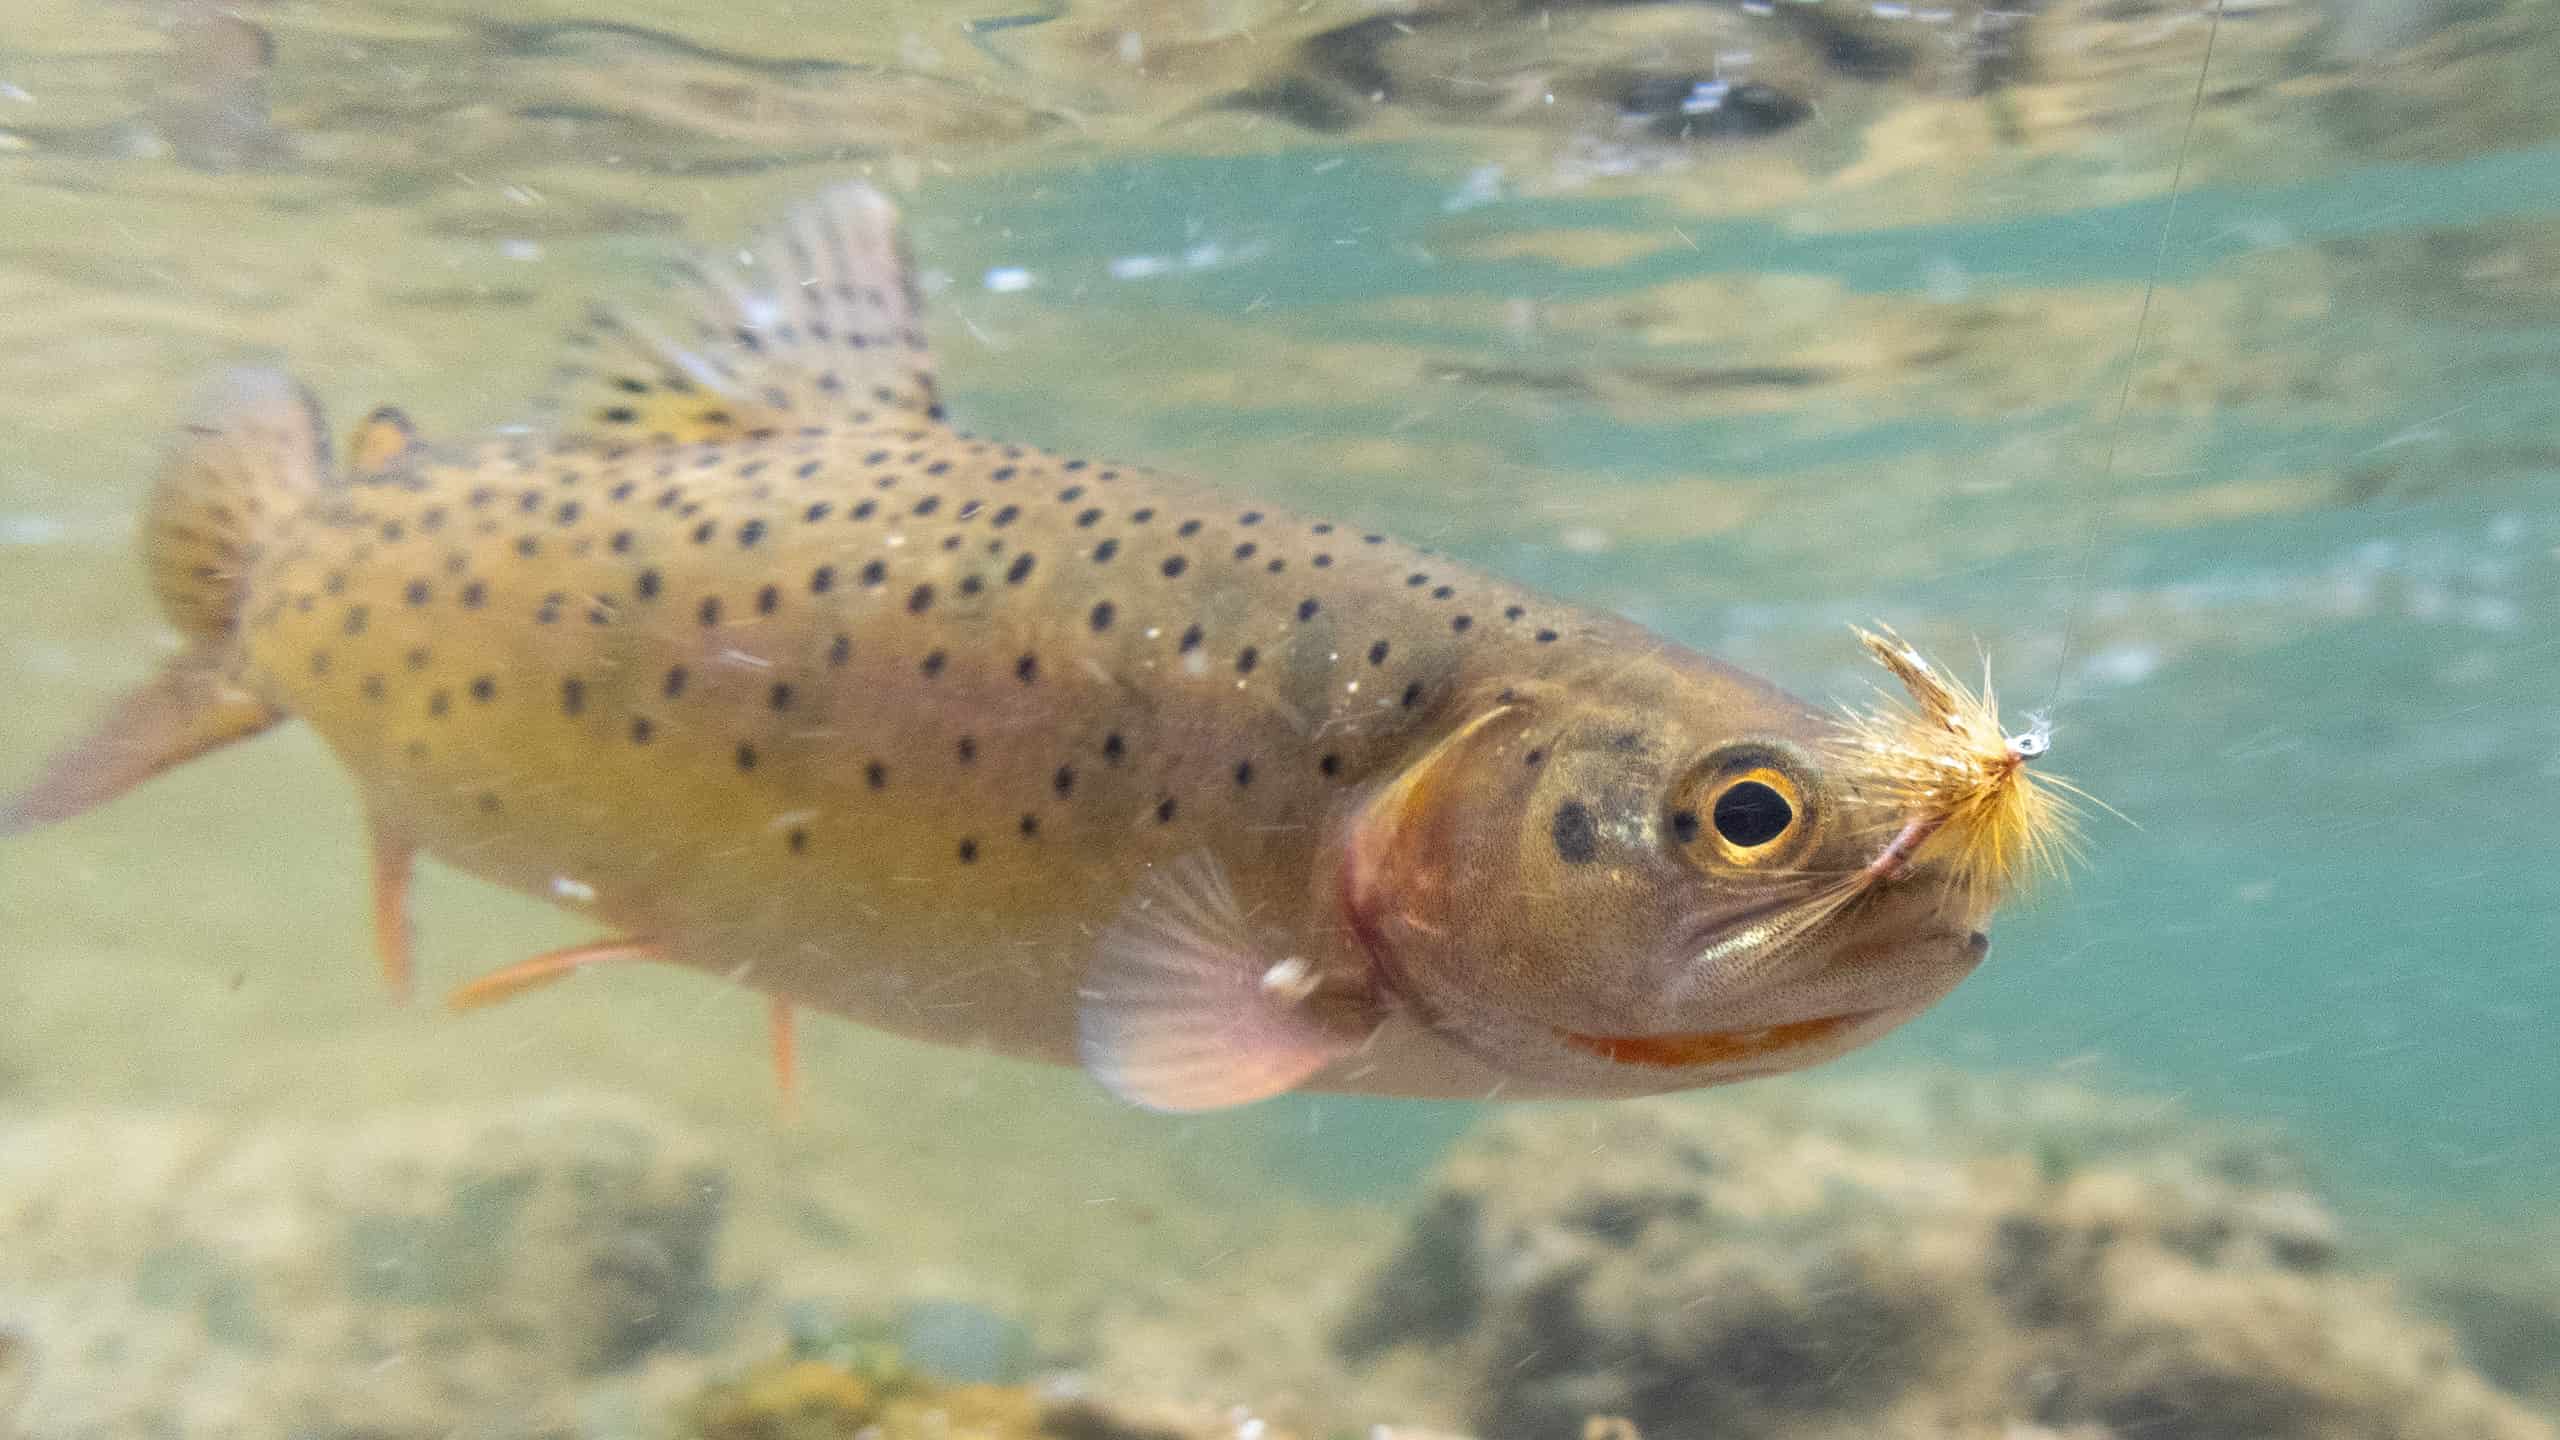 Cutthroat in water with fishing hook in its mouth